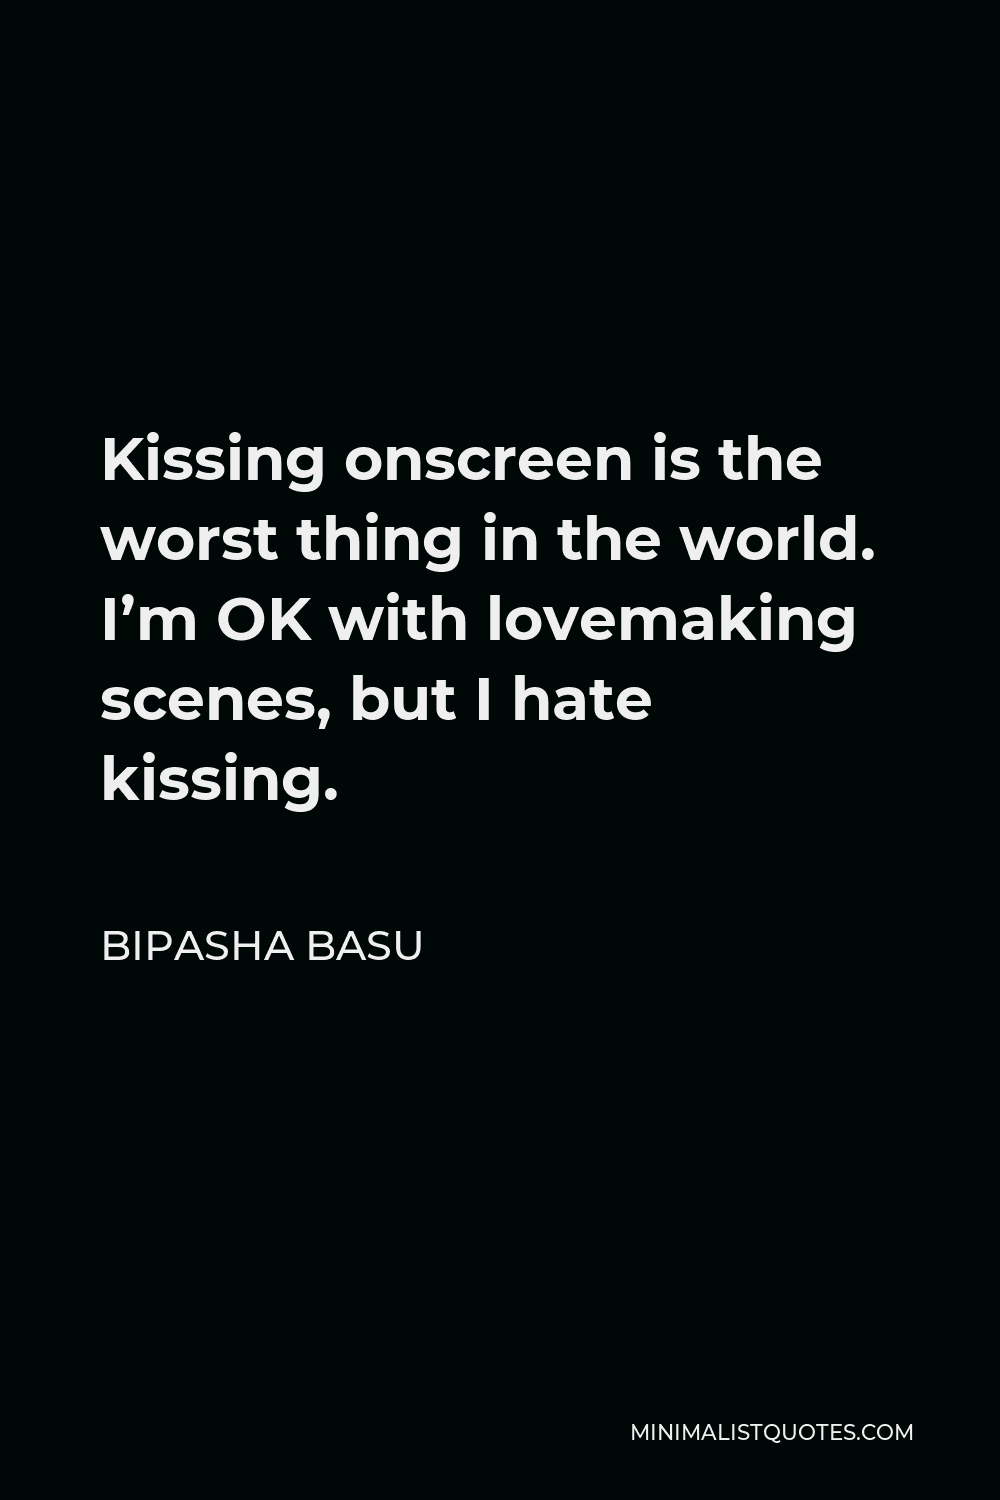 Bipasha Basu Quote - Kissing onscreen is the worst thing in the world. I’m OK with lovemaking scenes, but I hate kissing.